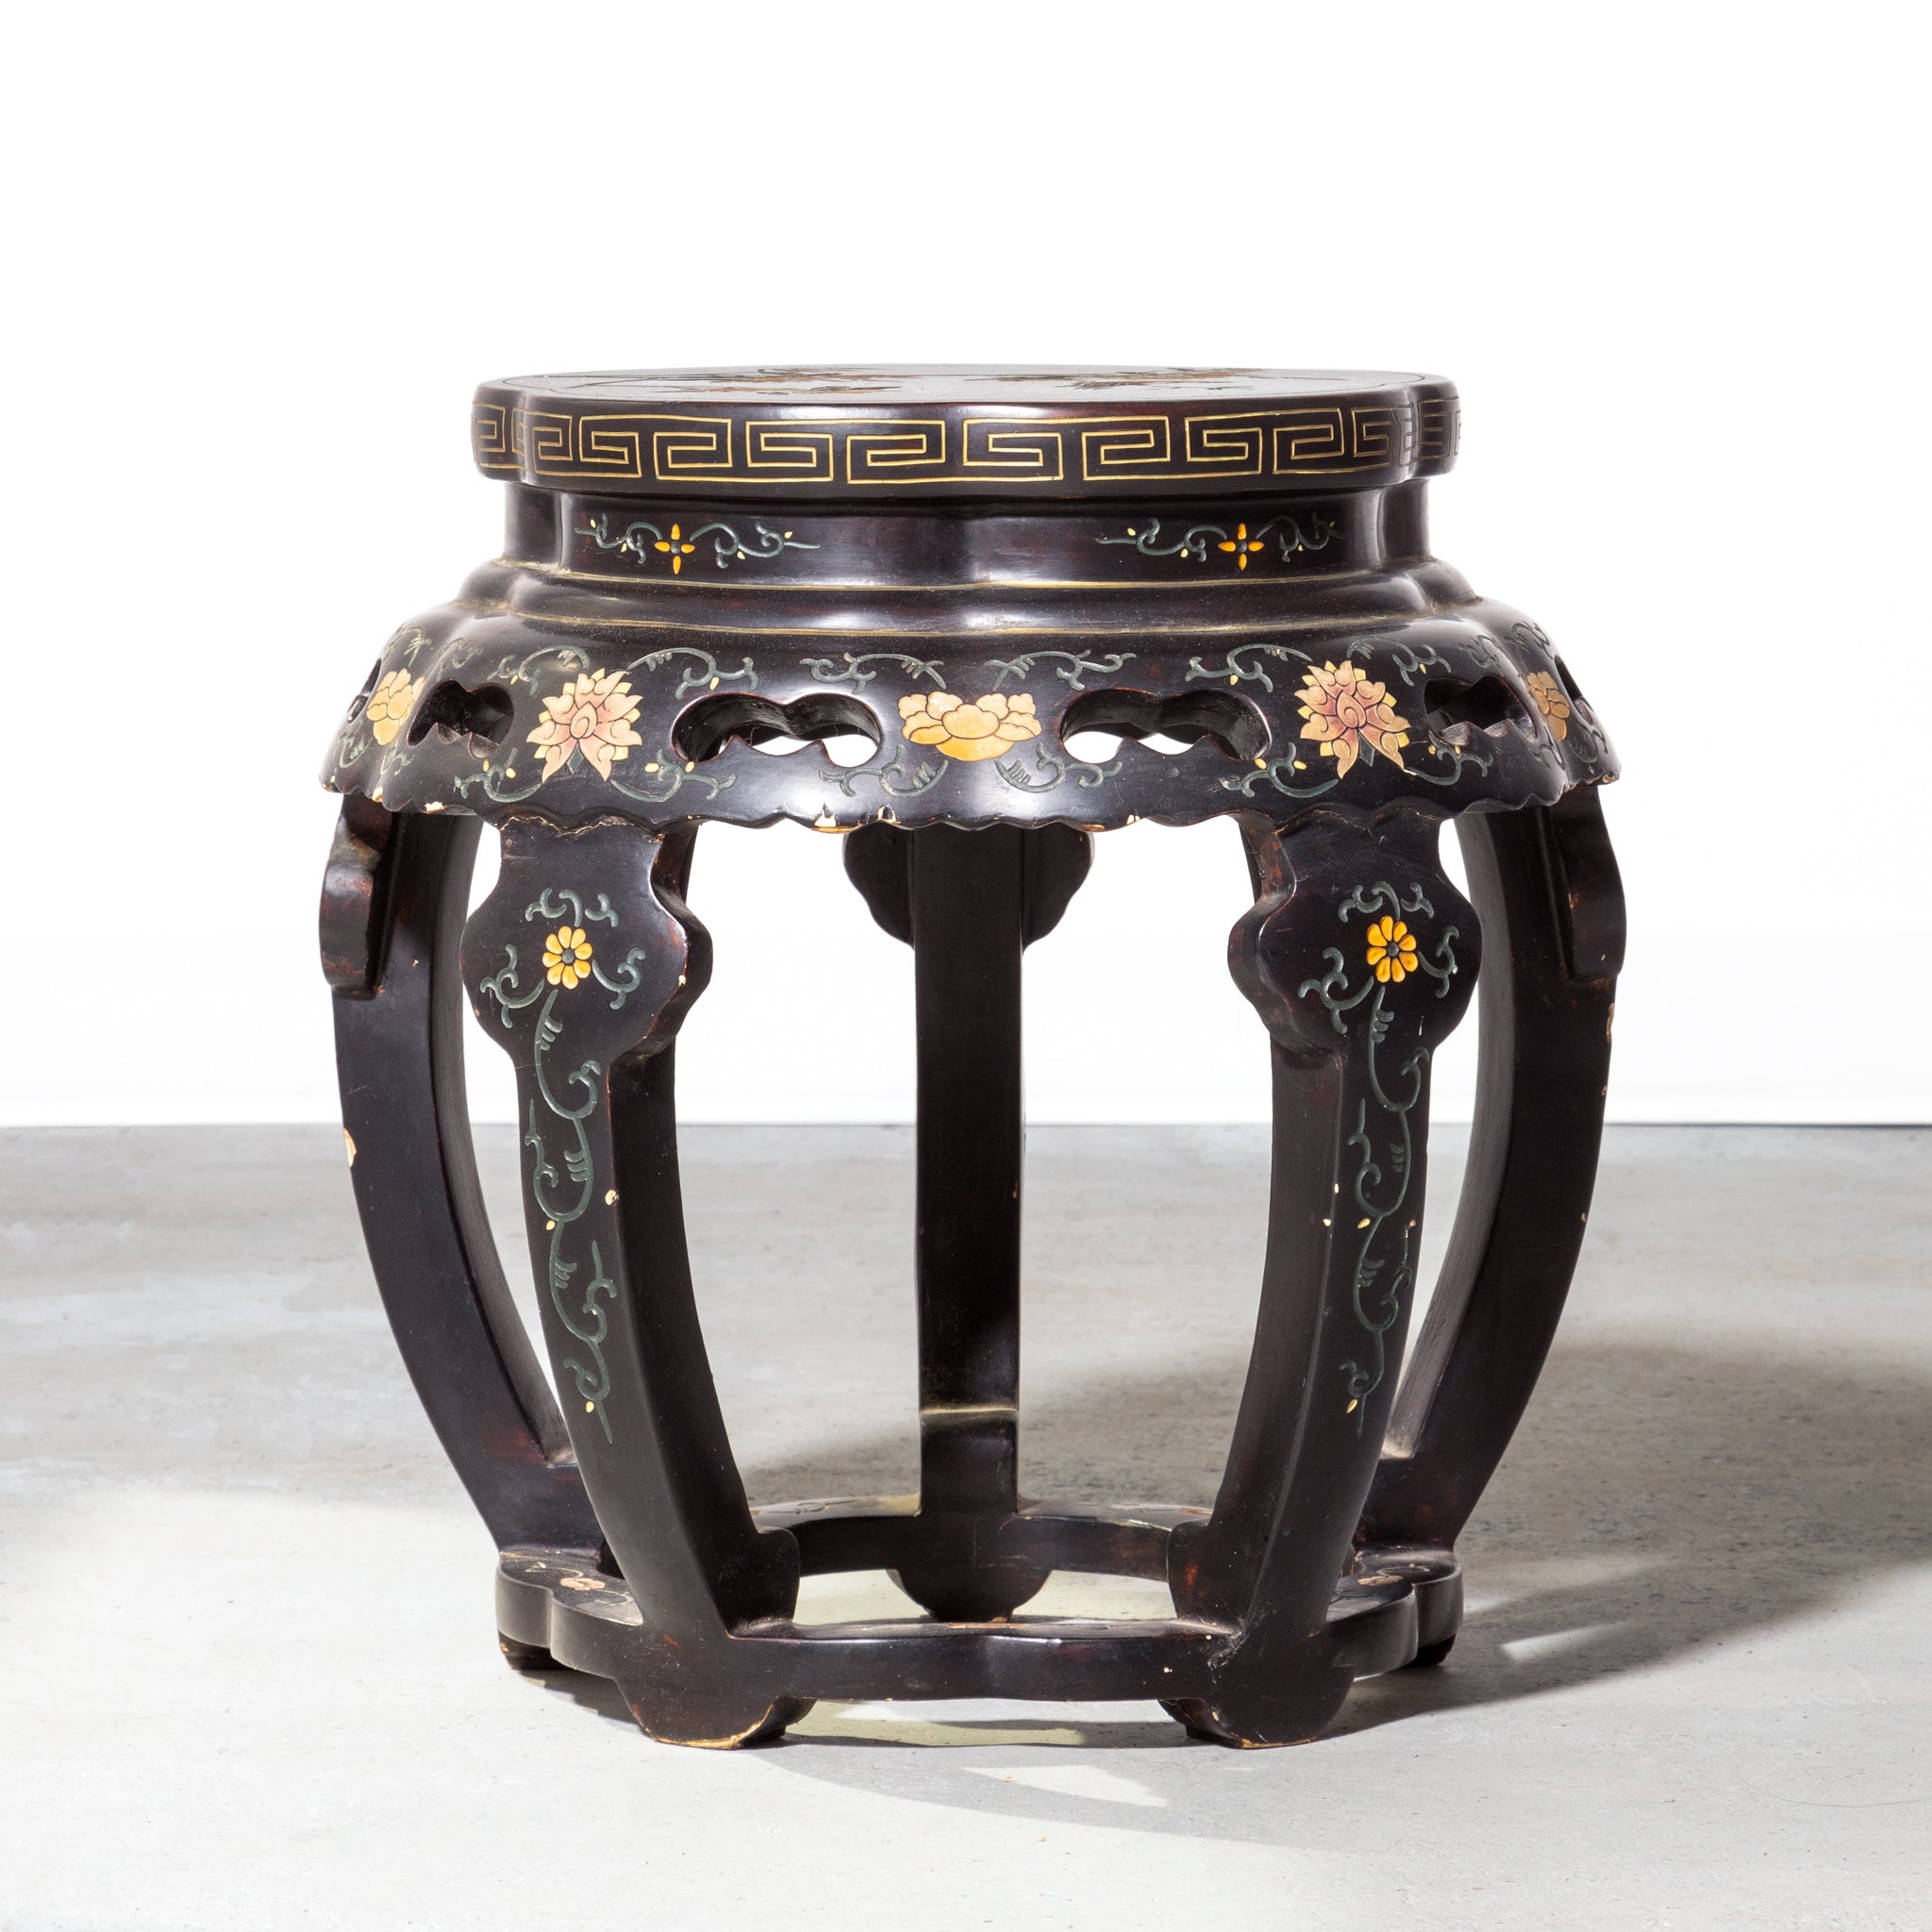 Chinese hand-painted lacquer stool